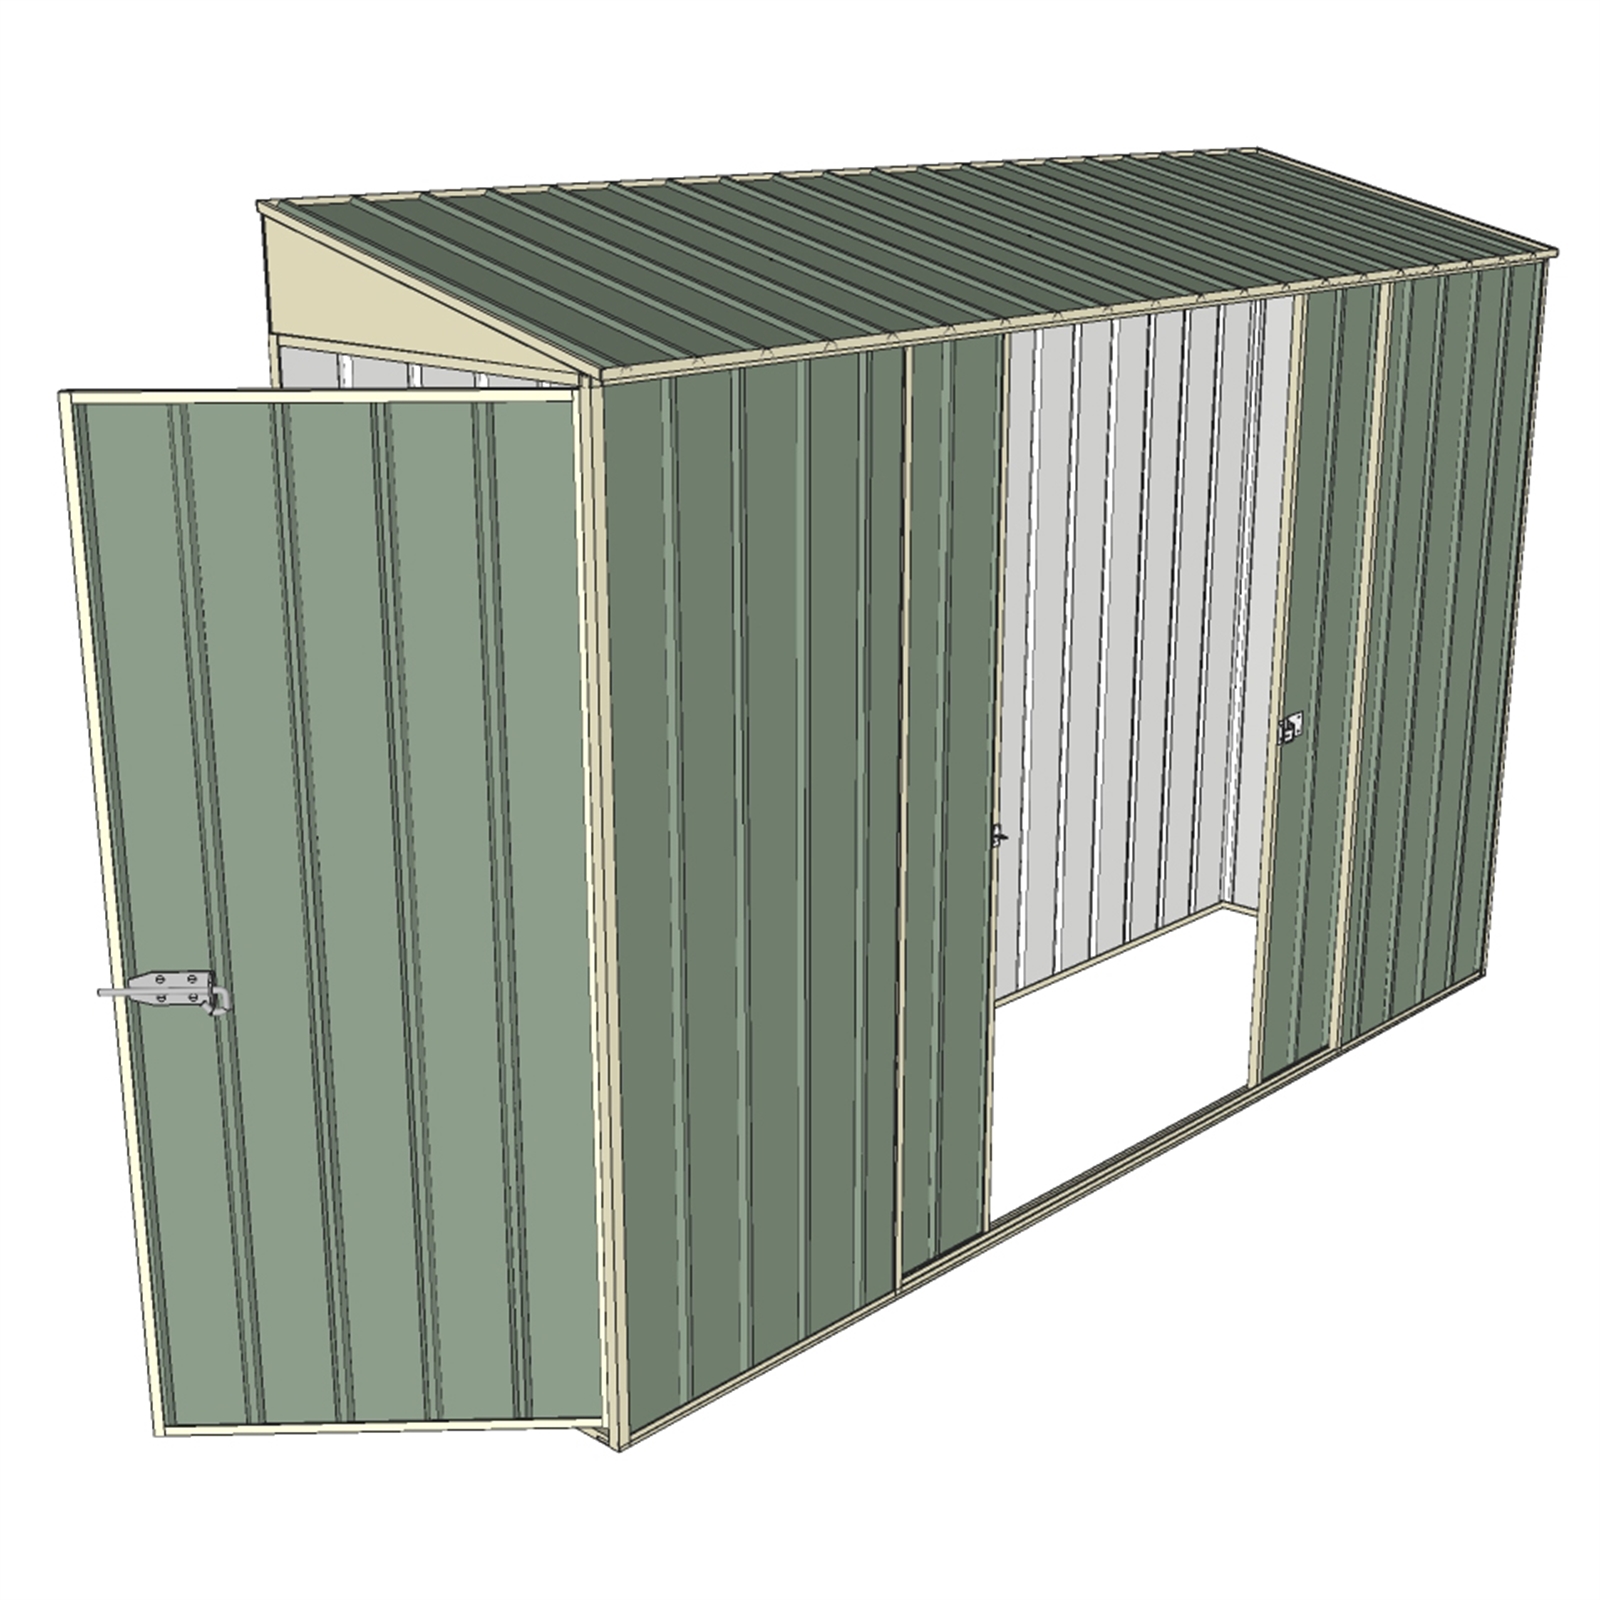 Build-a-Shed 3.0 x 2.0 x 0.8m Green Double Sliding and Single Hinge Door Narrow Skillion Shed